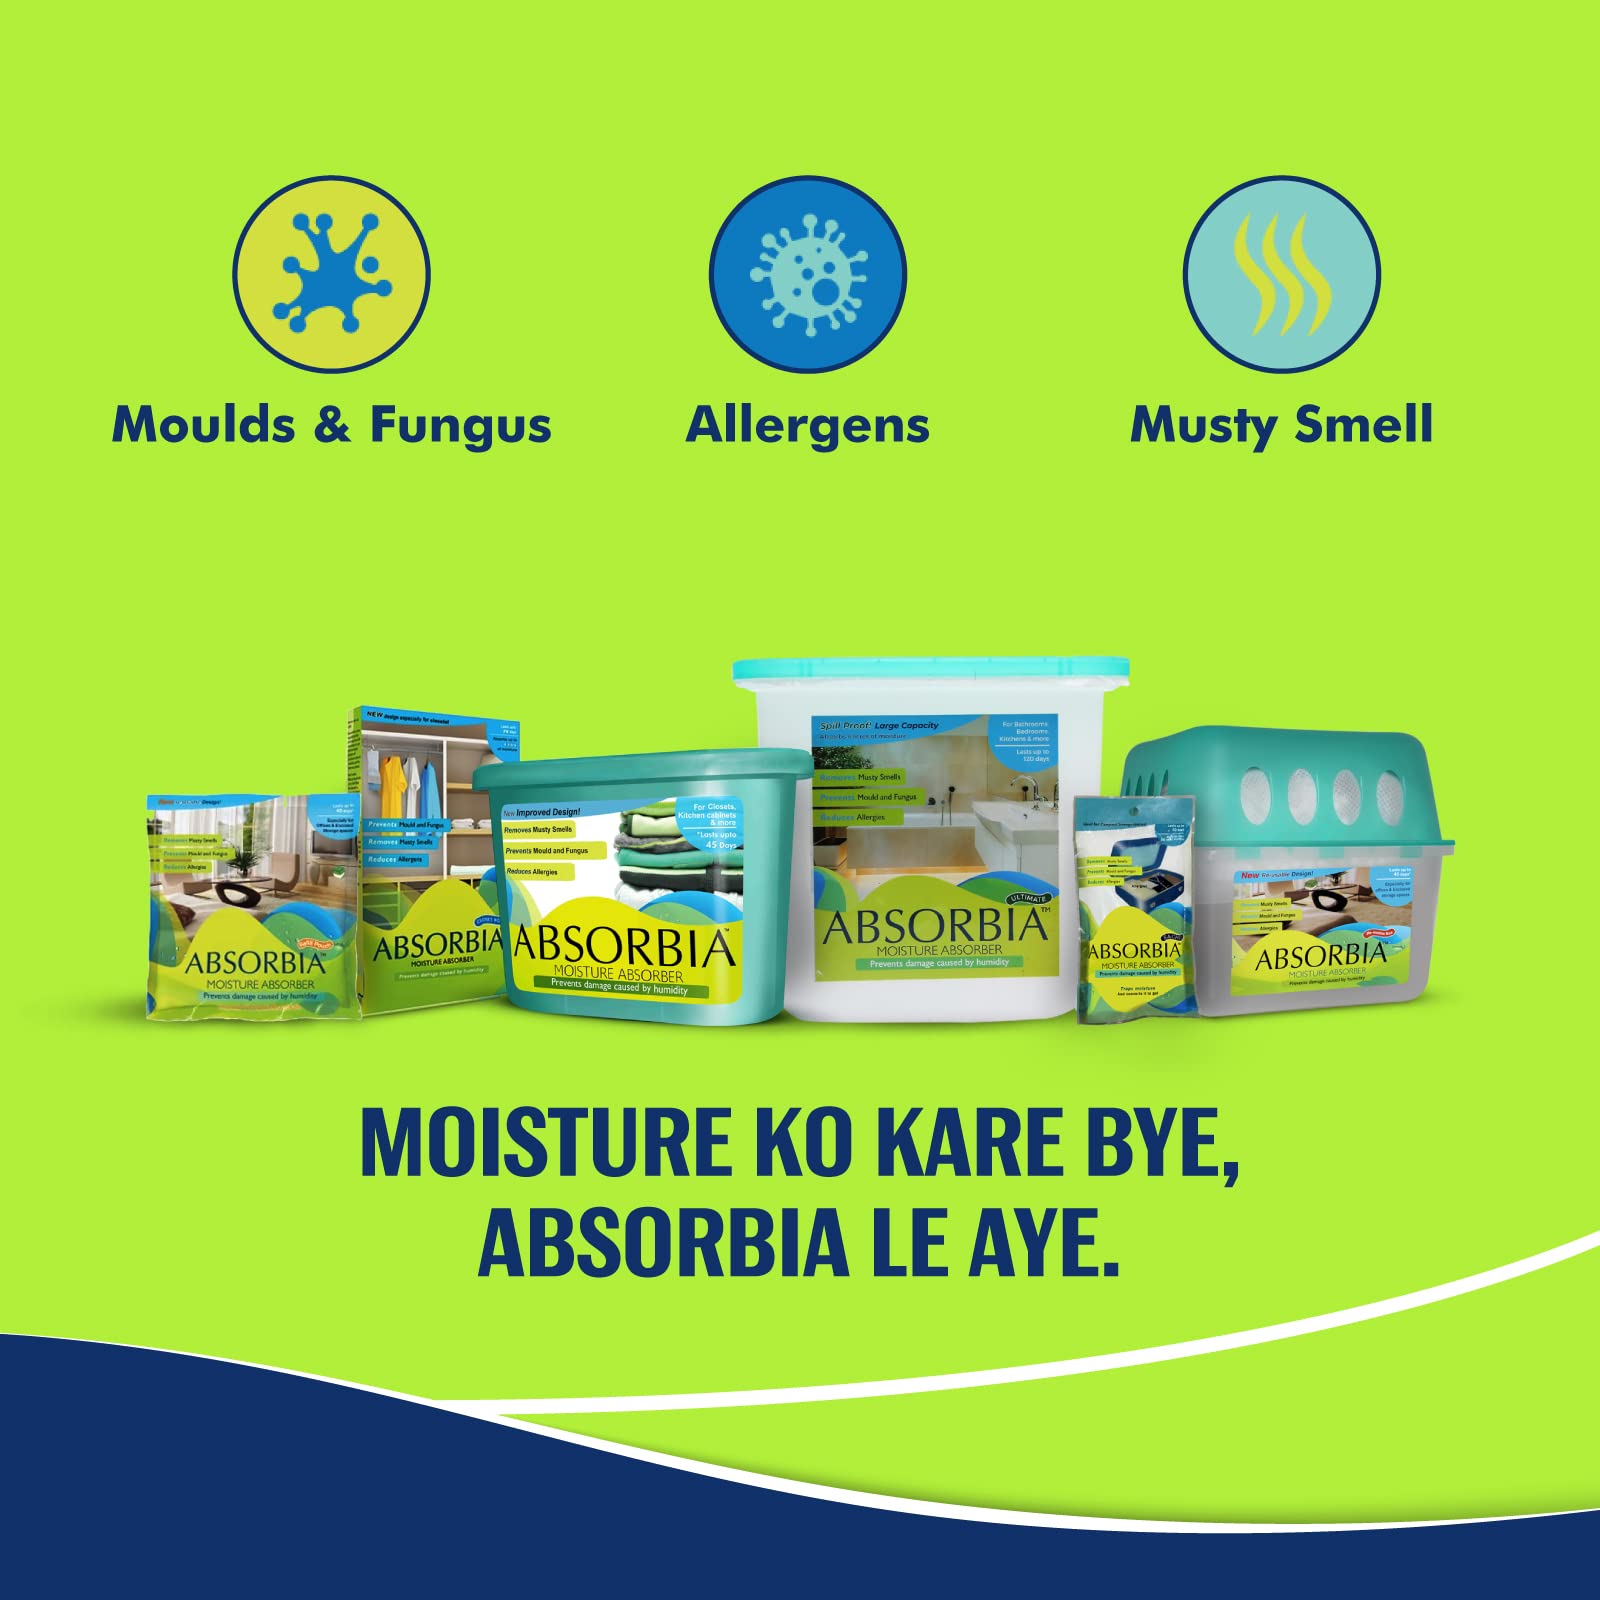 Absorbia Moisture Absorber | Absorbia Classic (300 gms X 6 boxes)- Season Pack of 6 | Absorption Capacity 600ml Each|Dehumidier for Wardrobe etc| Fights Against Moisture, Mould, Fungus & Musty smells